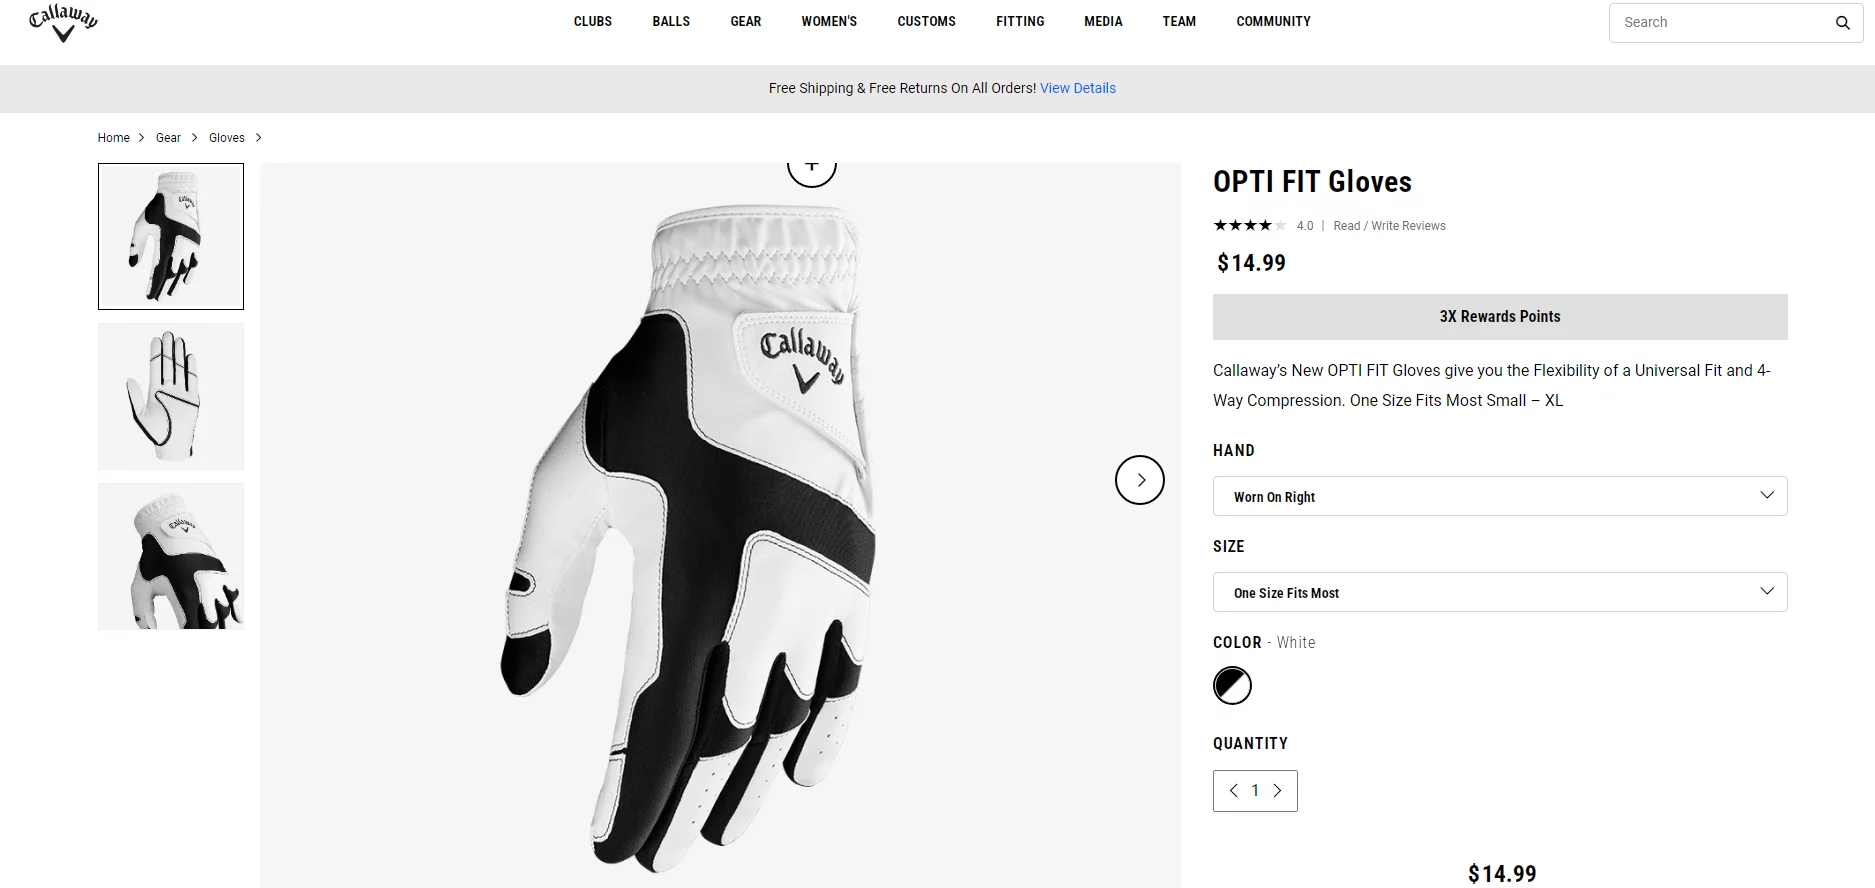 FootJoy StaSof Glove: Superior Fit and Feel